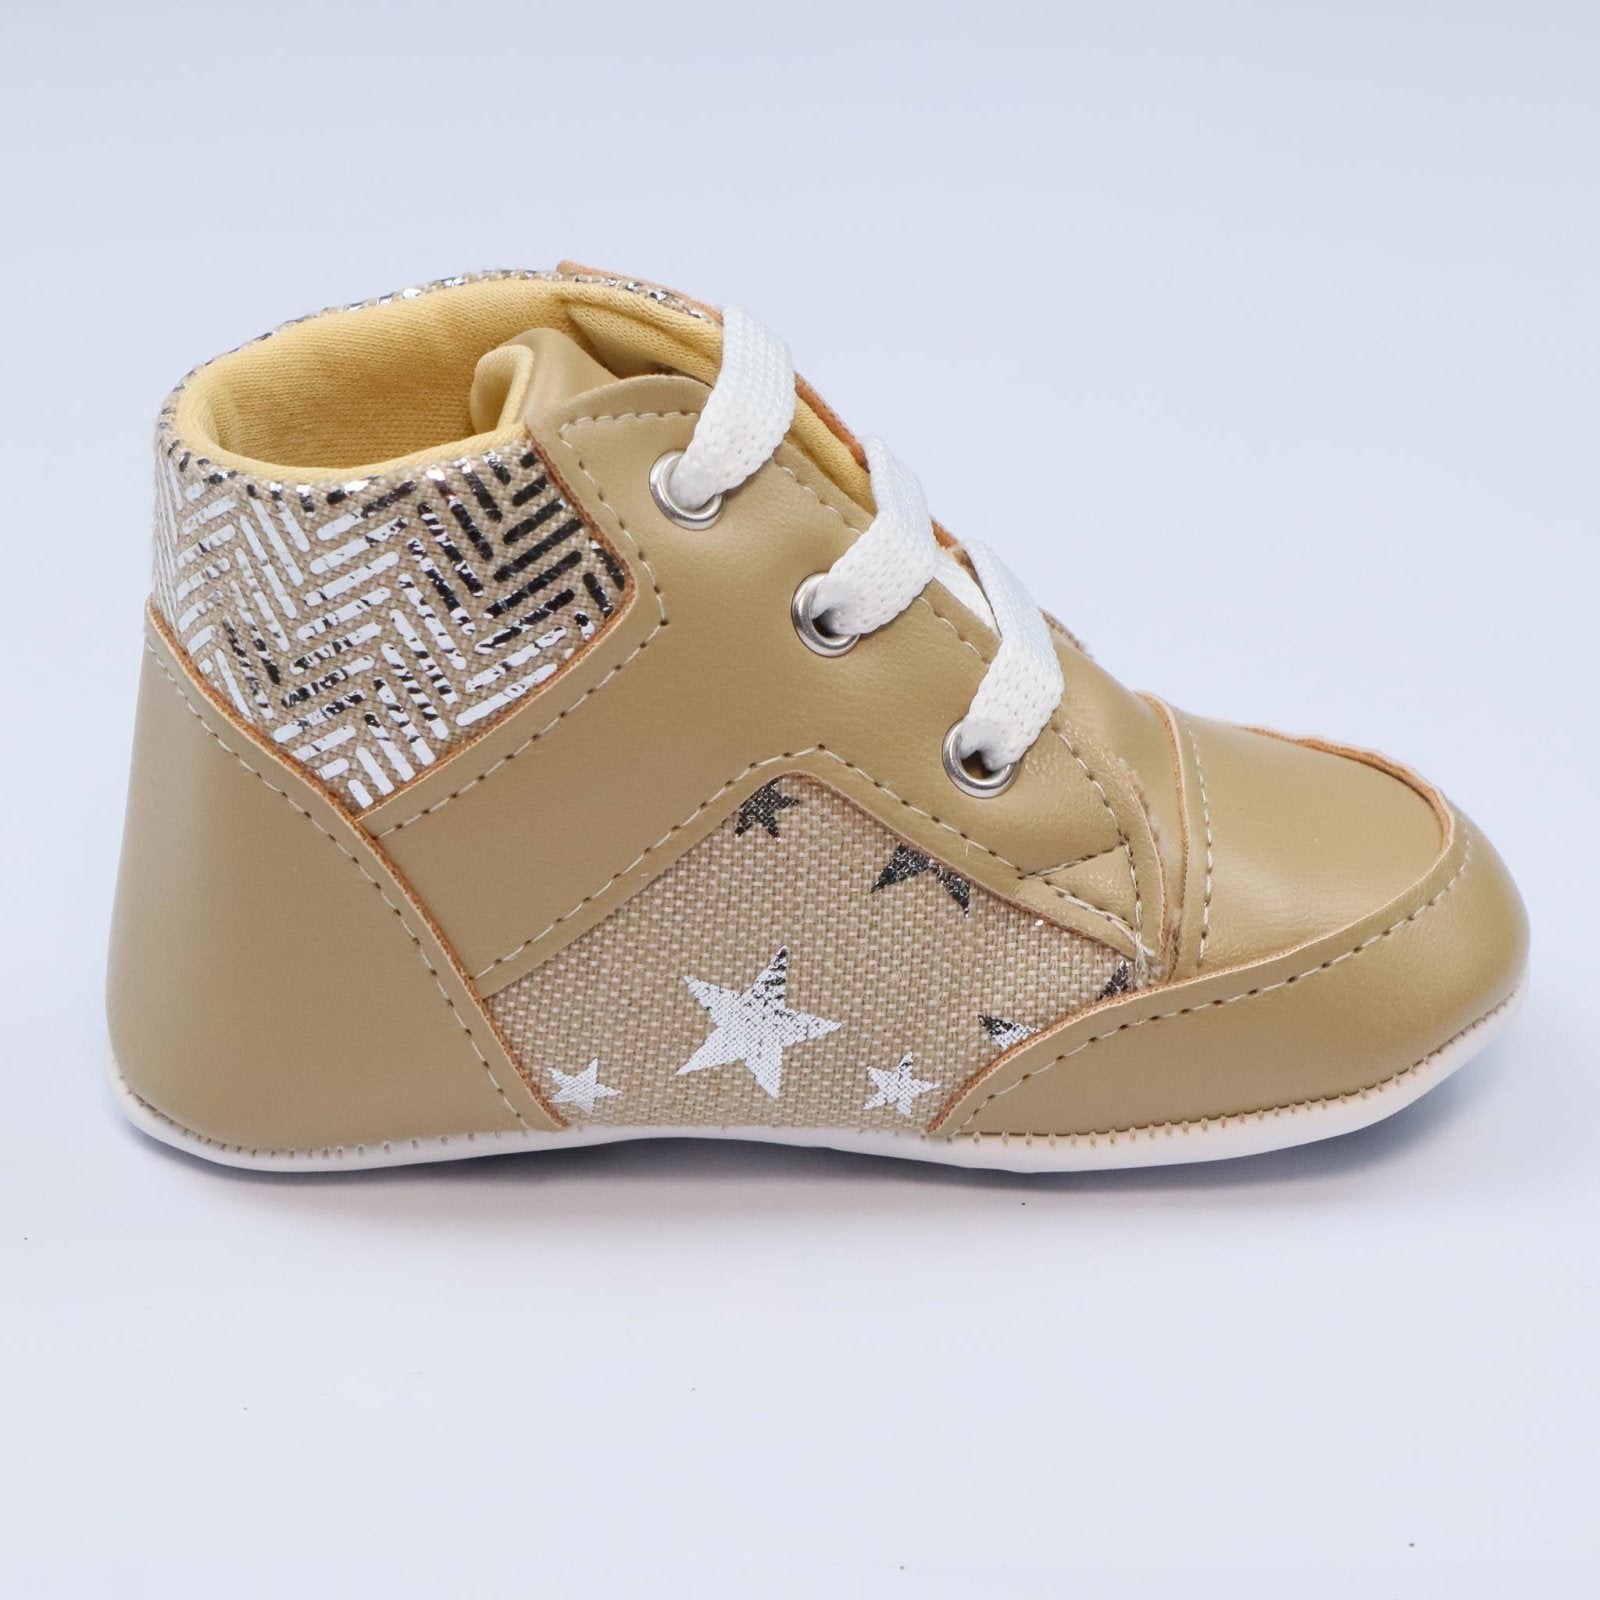 Baby Shoes Brown Color With Stars by Baby Pattini